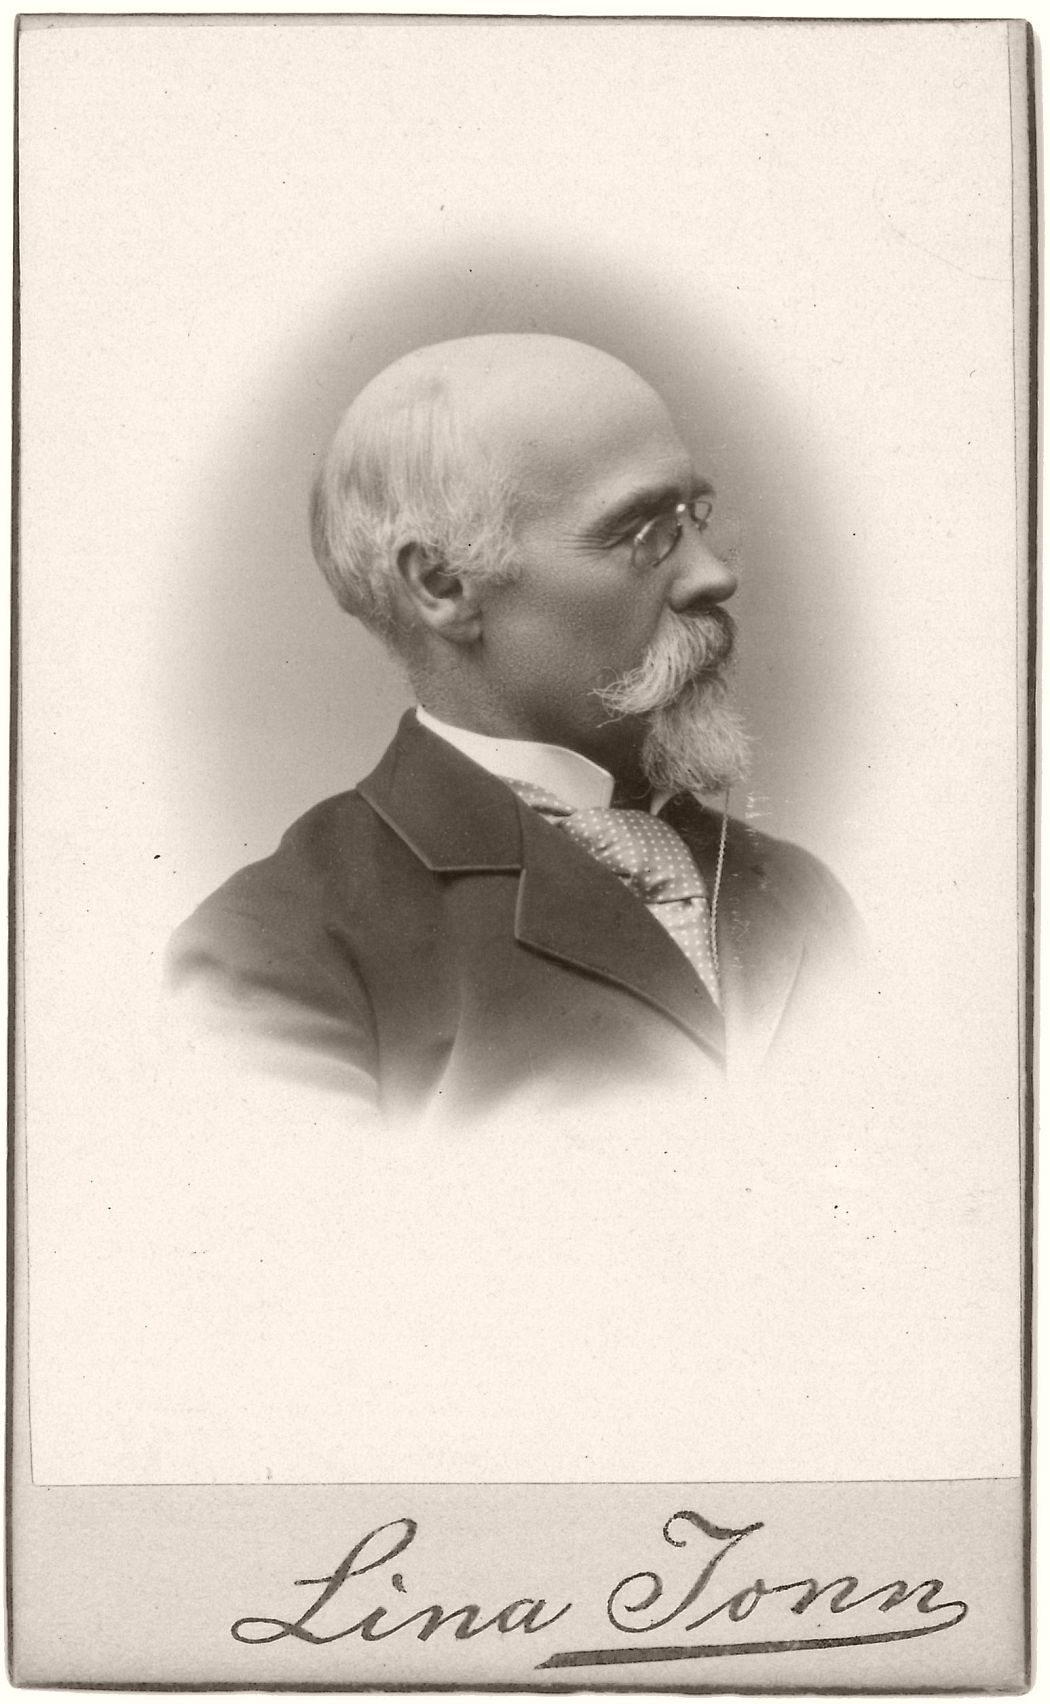 Elof Tegnér (1844-1900), Swedish librarian; head of the University library in Lund.